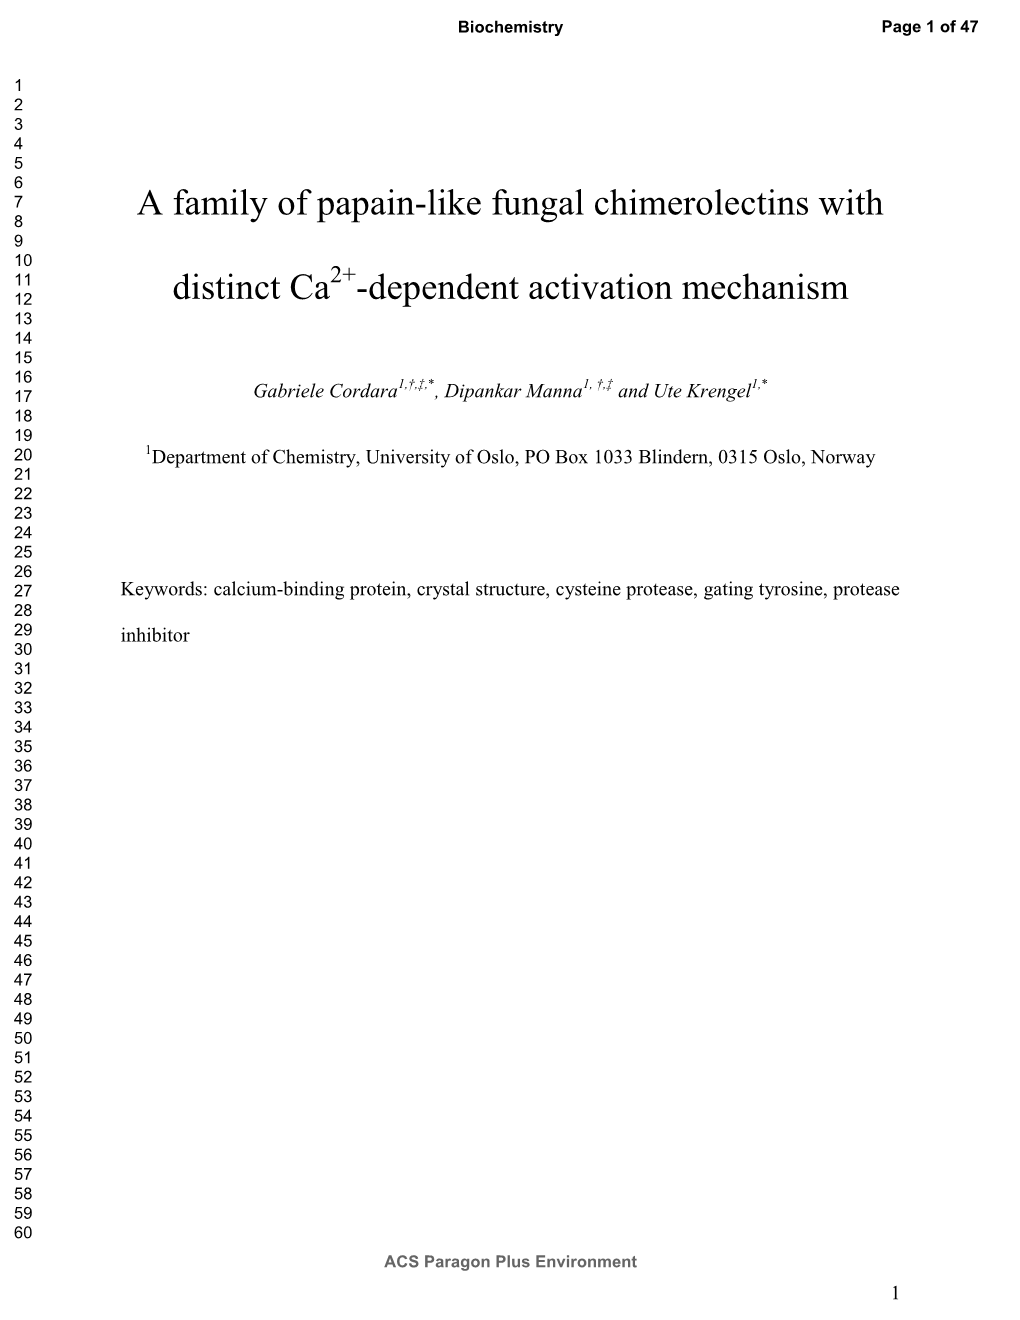 A Family of Papain-Like Fungal Chimerolectins with Distinct Ca